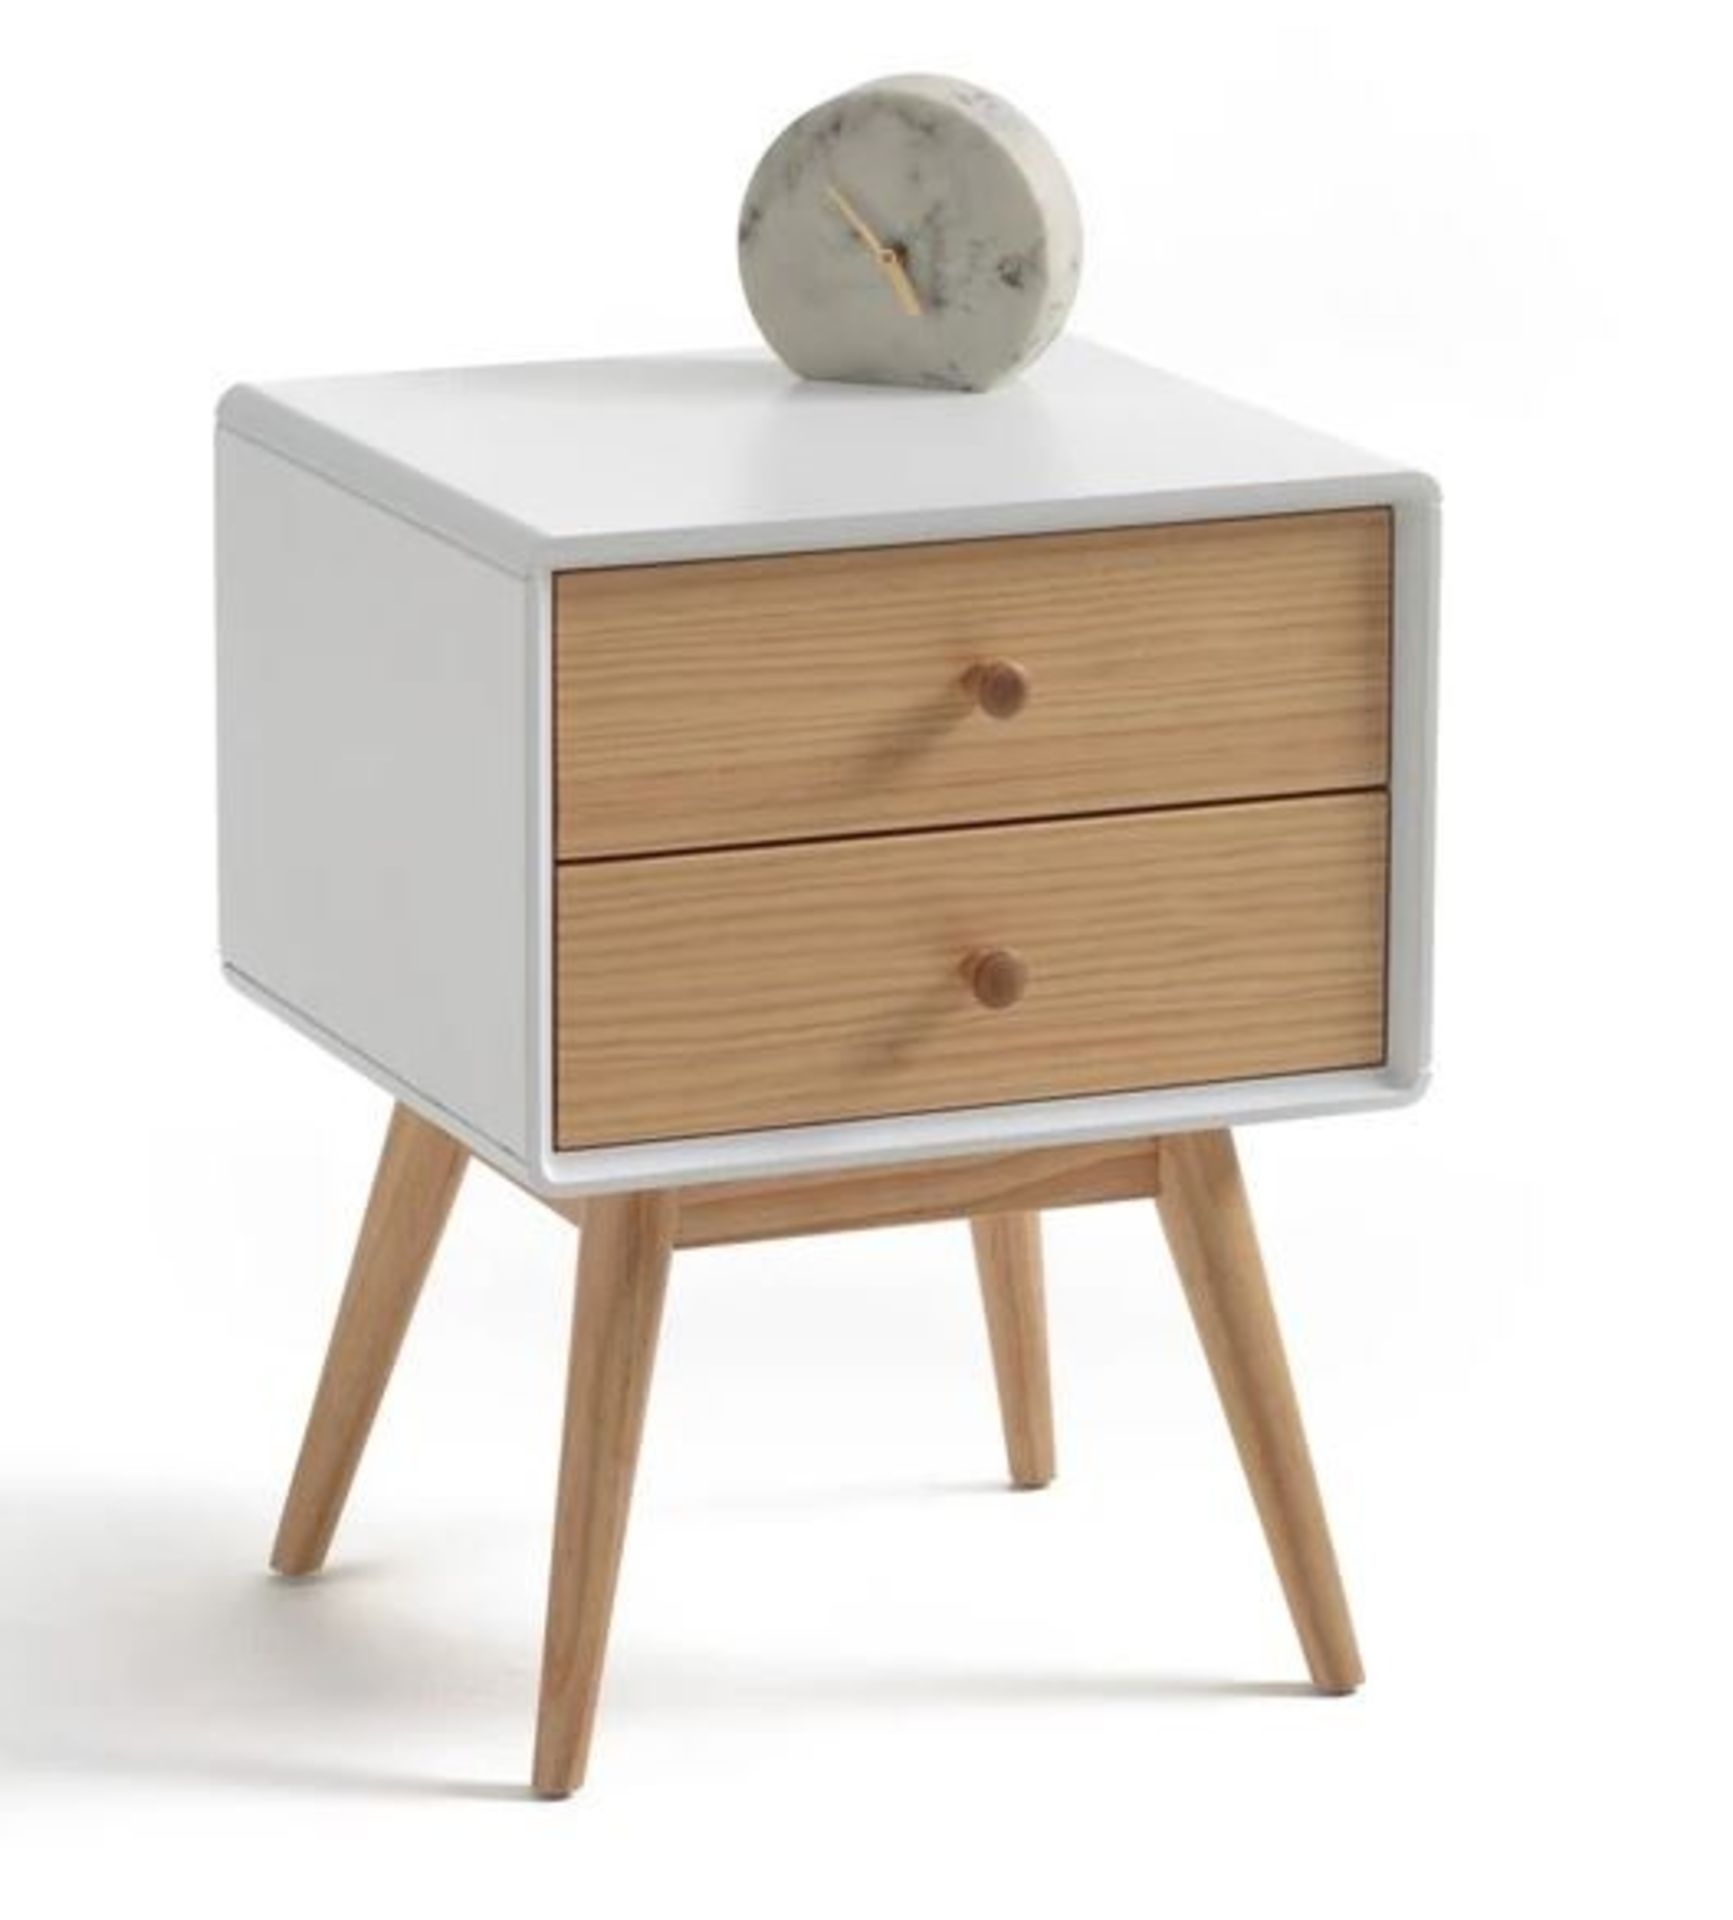 LA REDOUTE JIMI BEDSIDE TABLE WITH 2 DRAWERS